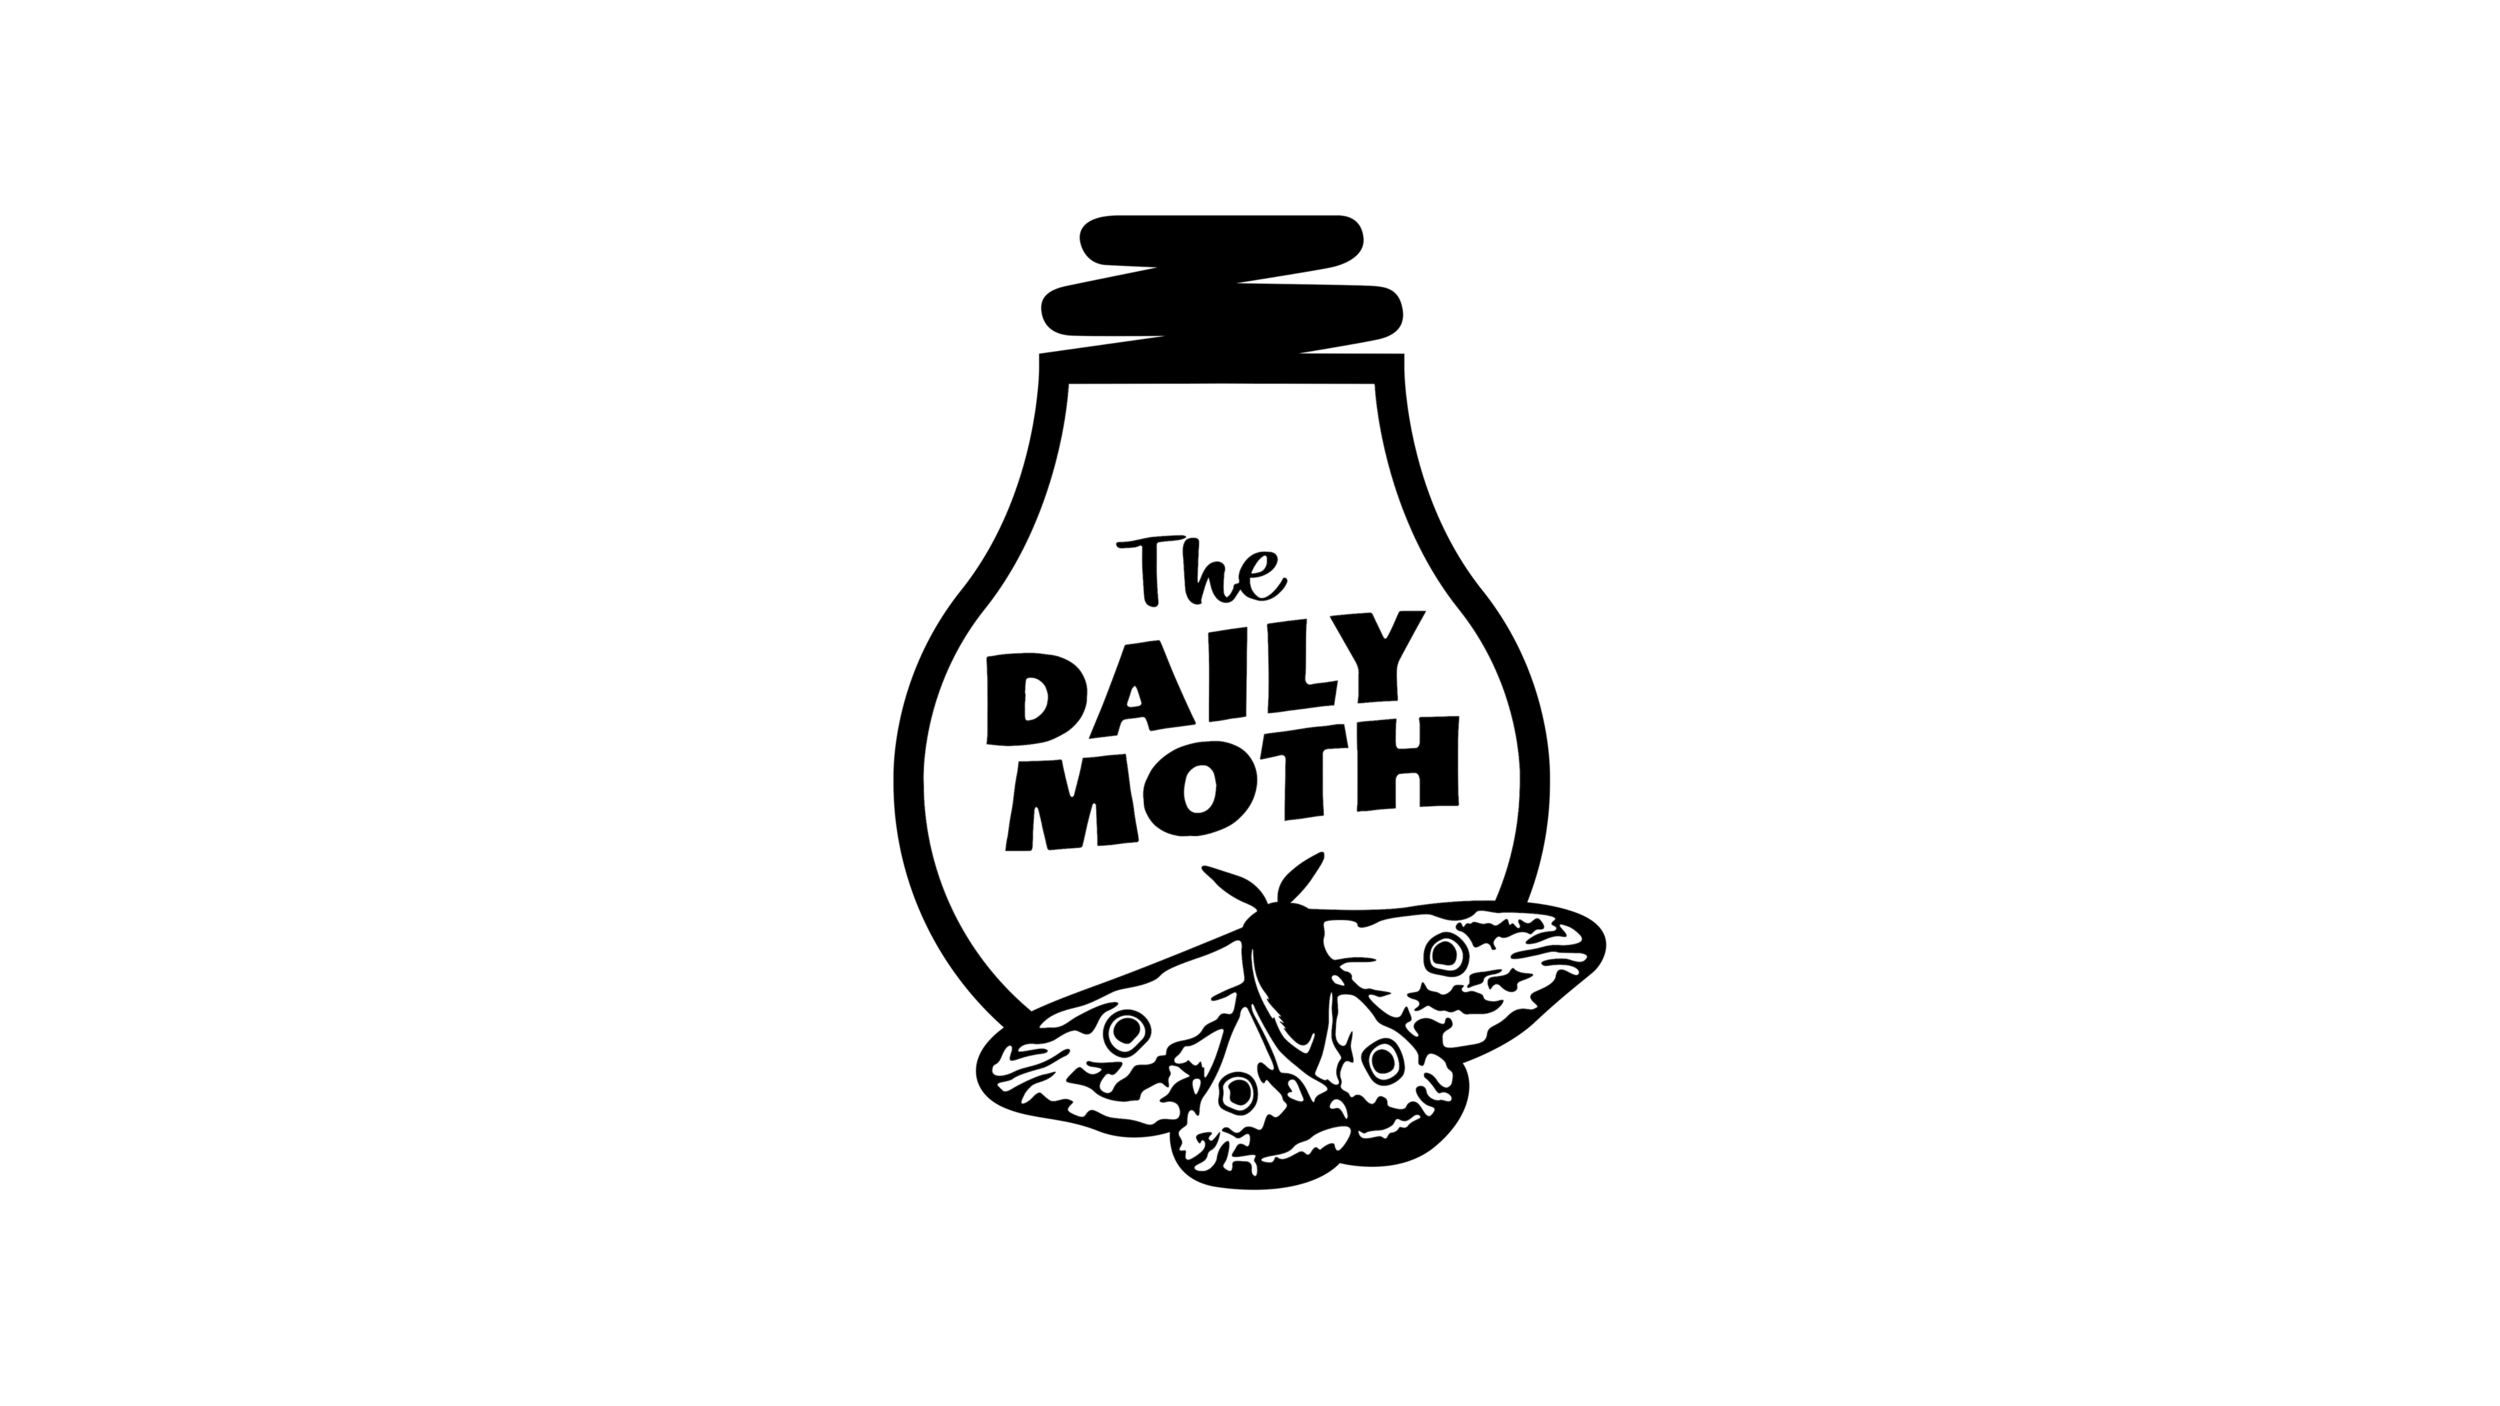 The Daily Moth